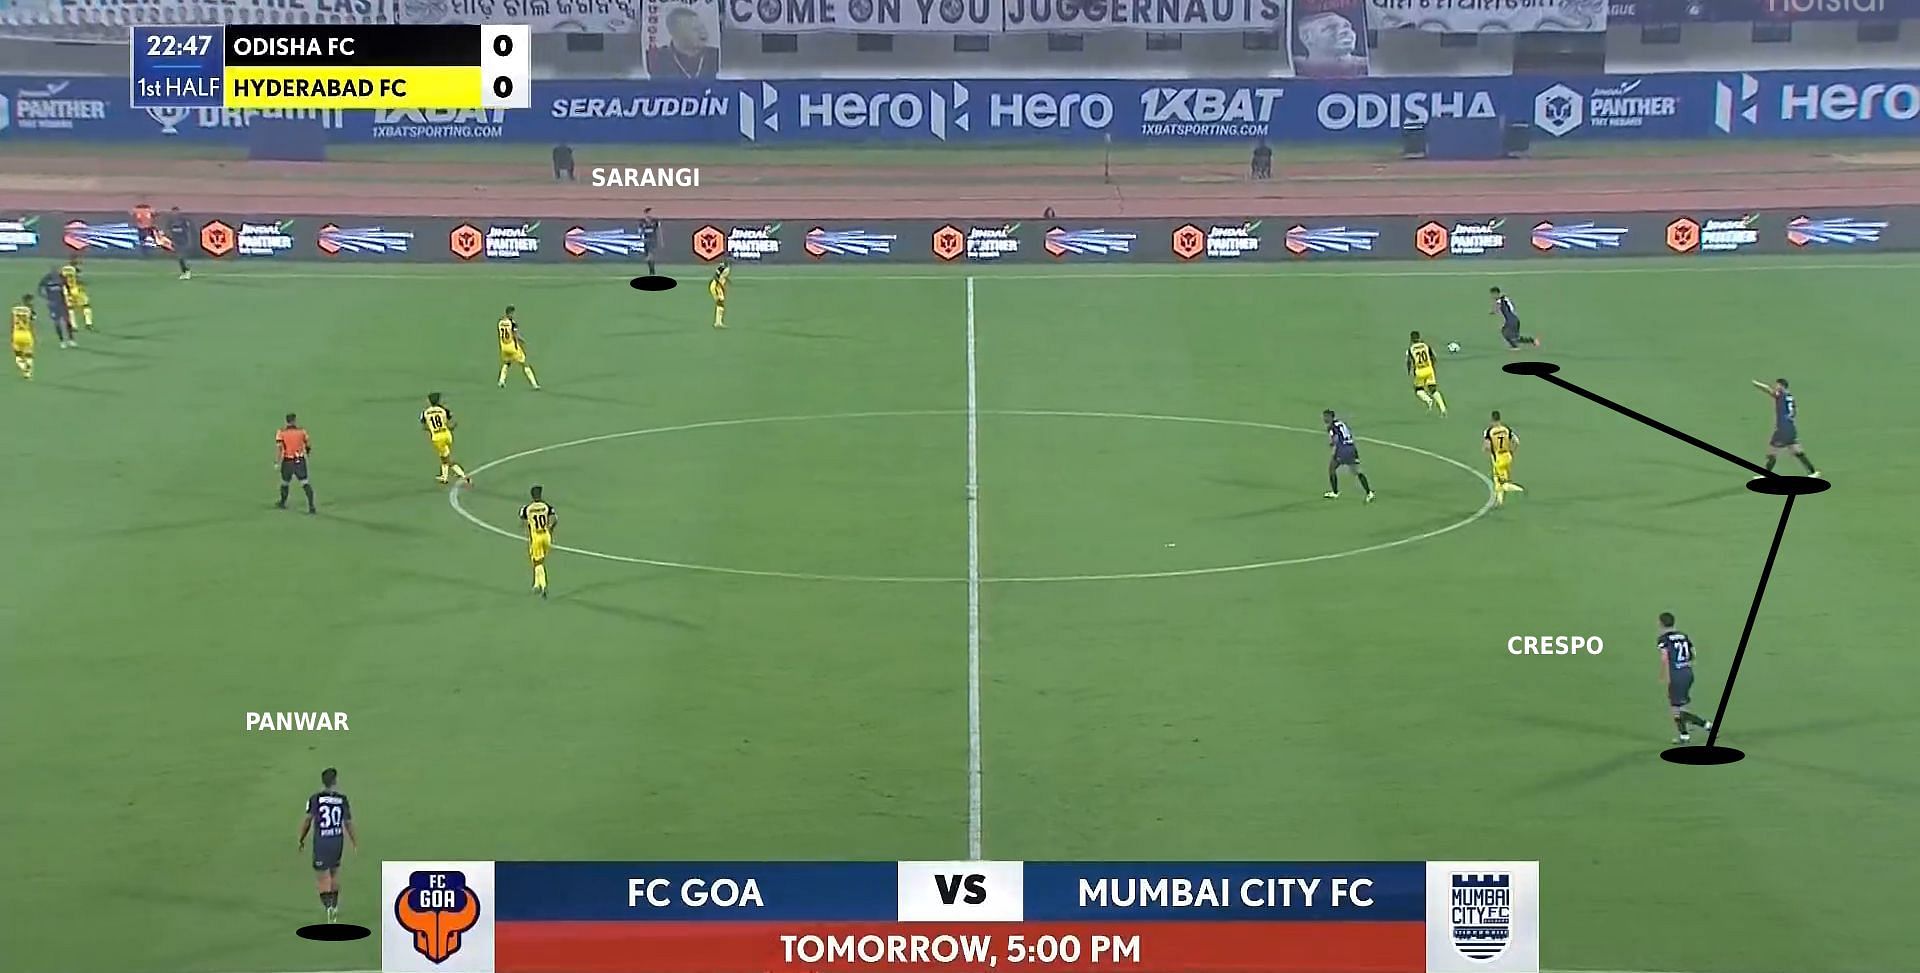 Saul Crespo dropping deeper to allow the full backs to advance (Image Credits: Hotstar)